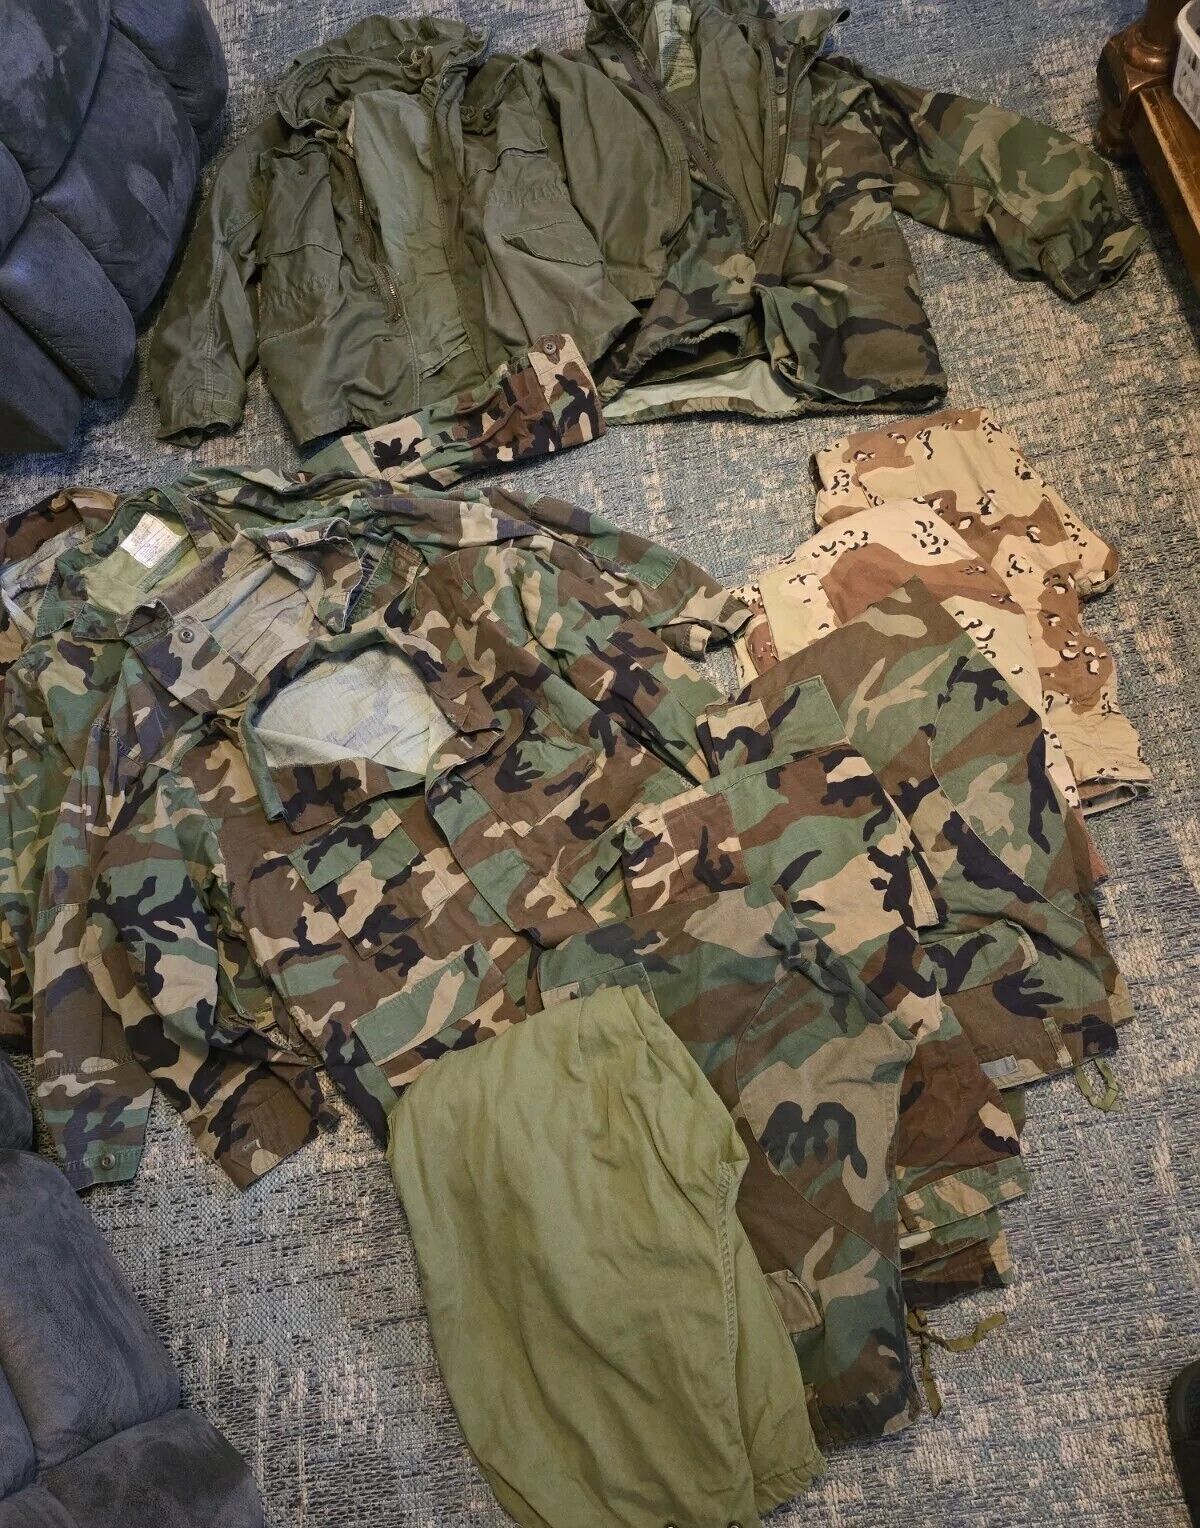 Vintage Camo Army Uniform Lot Military Issue Cargo Combat Pants Shirt Lot Of 12